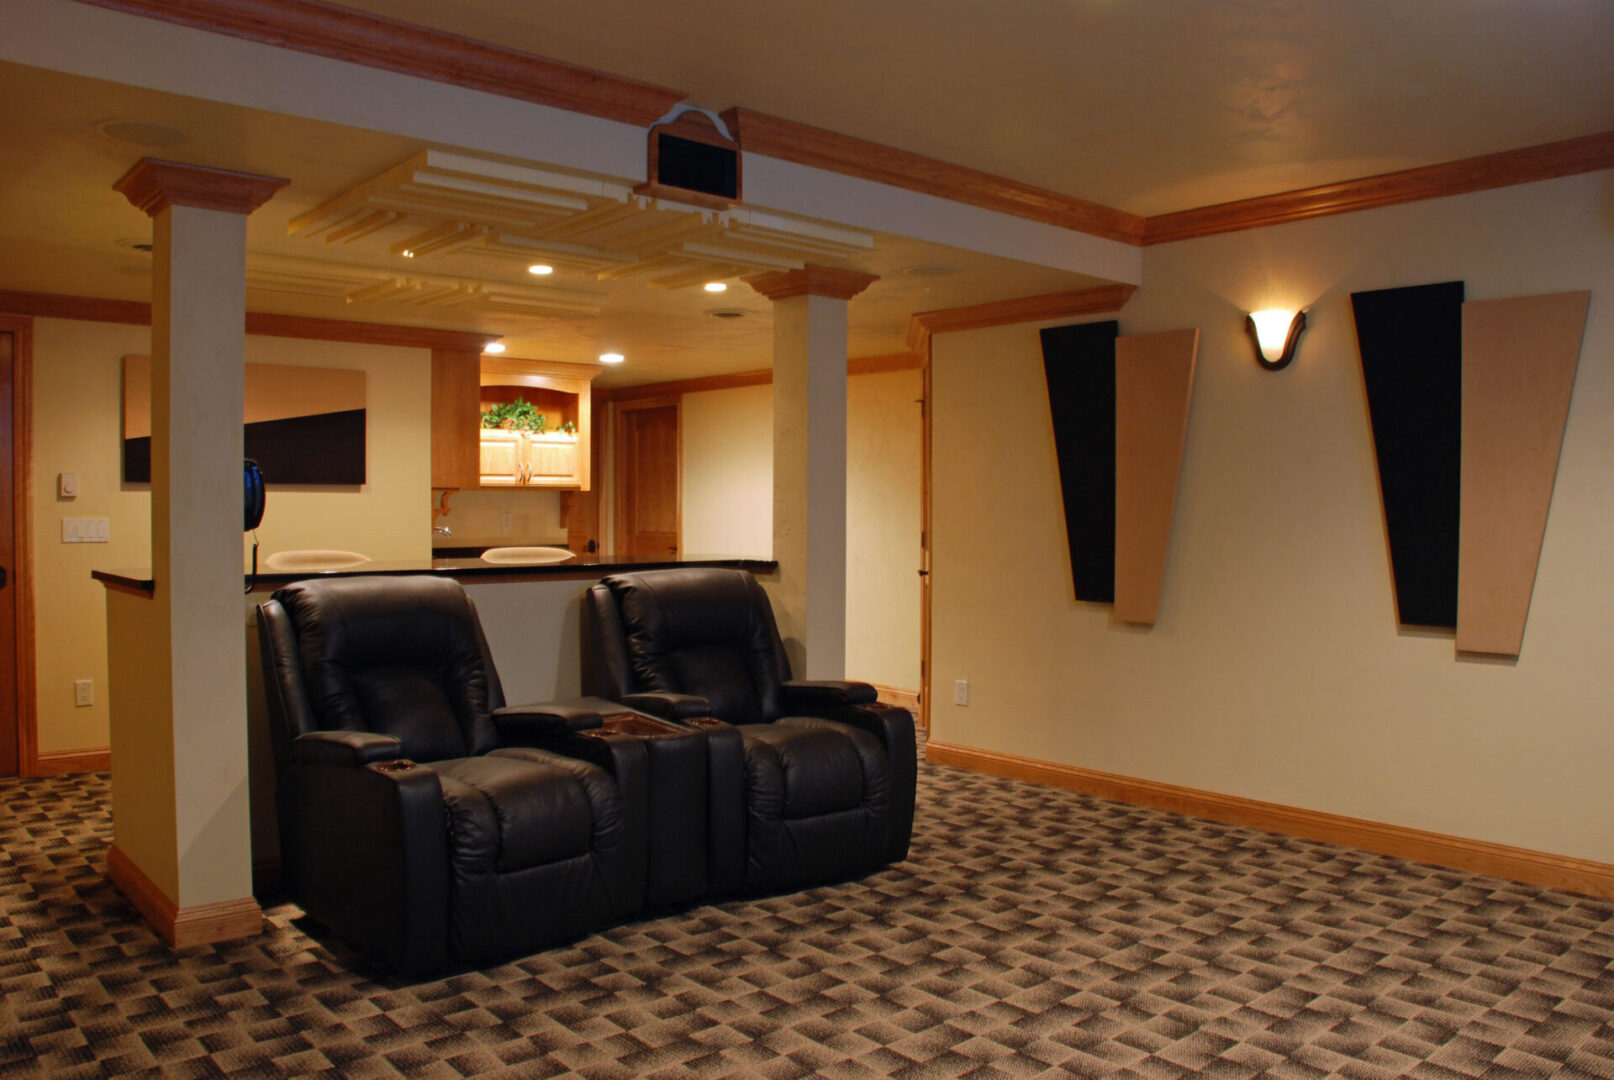 Home theater with two-toned decorative sound systems